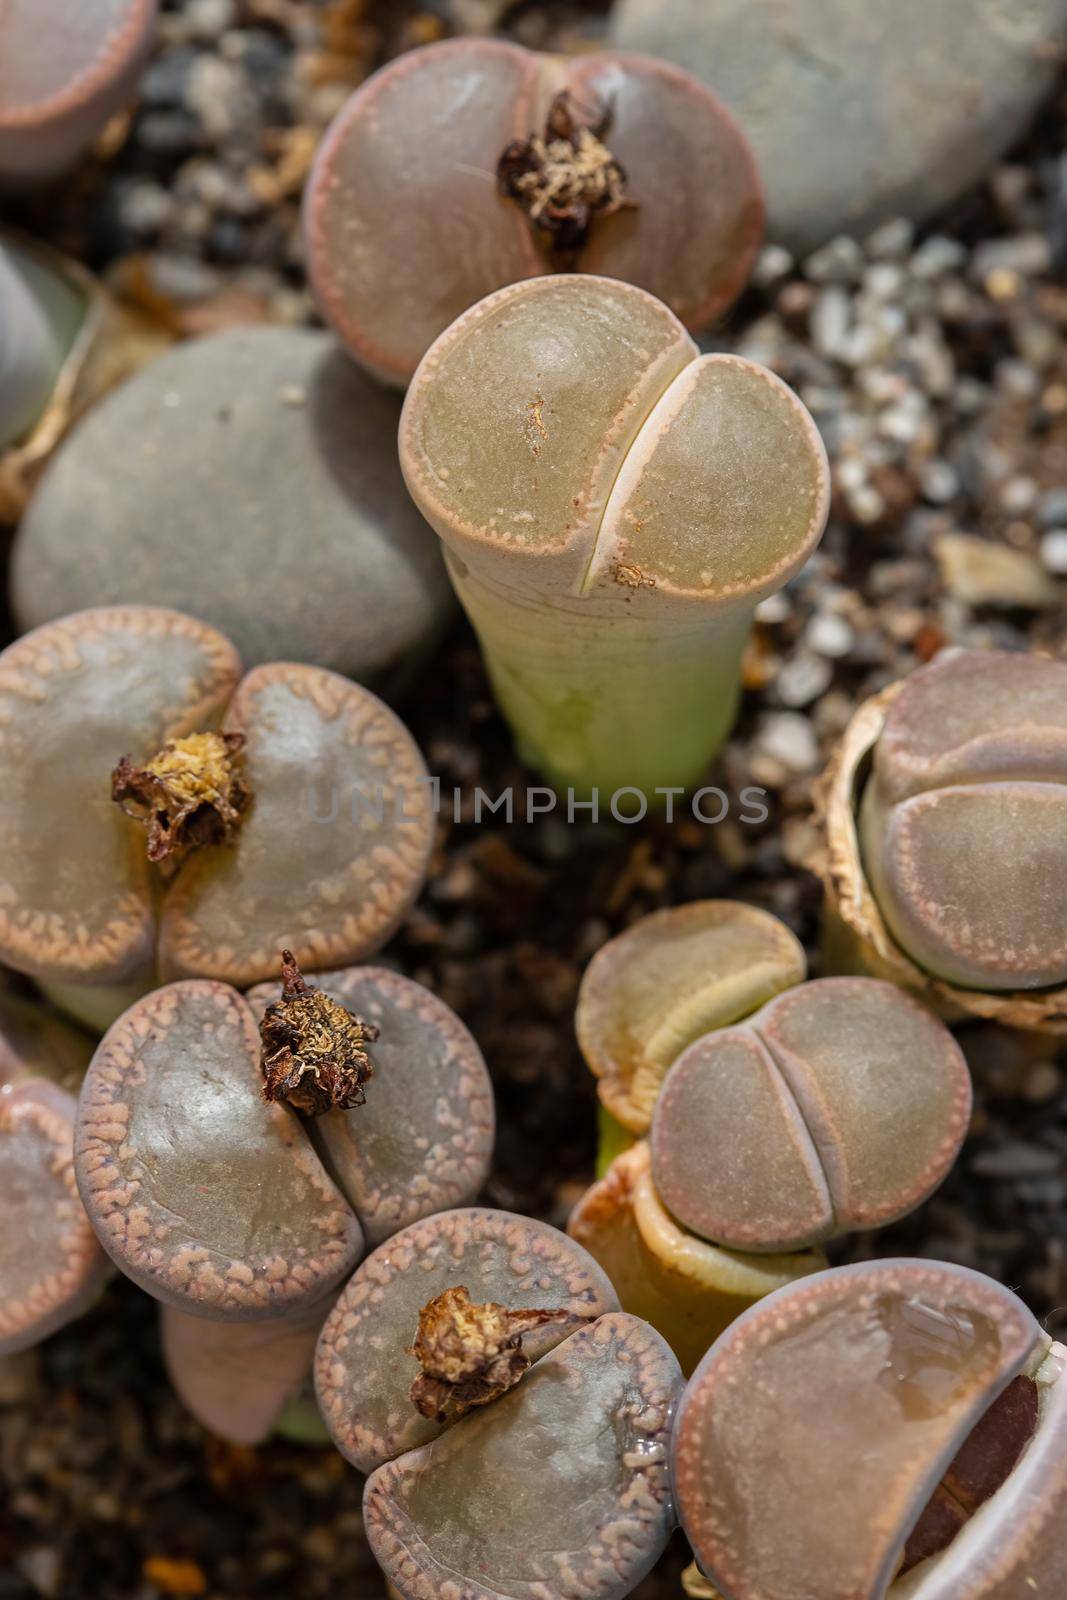 Lithops Living stone, Cactus on flower pot at the greenhouse garden.